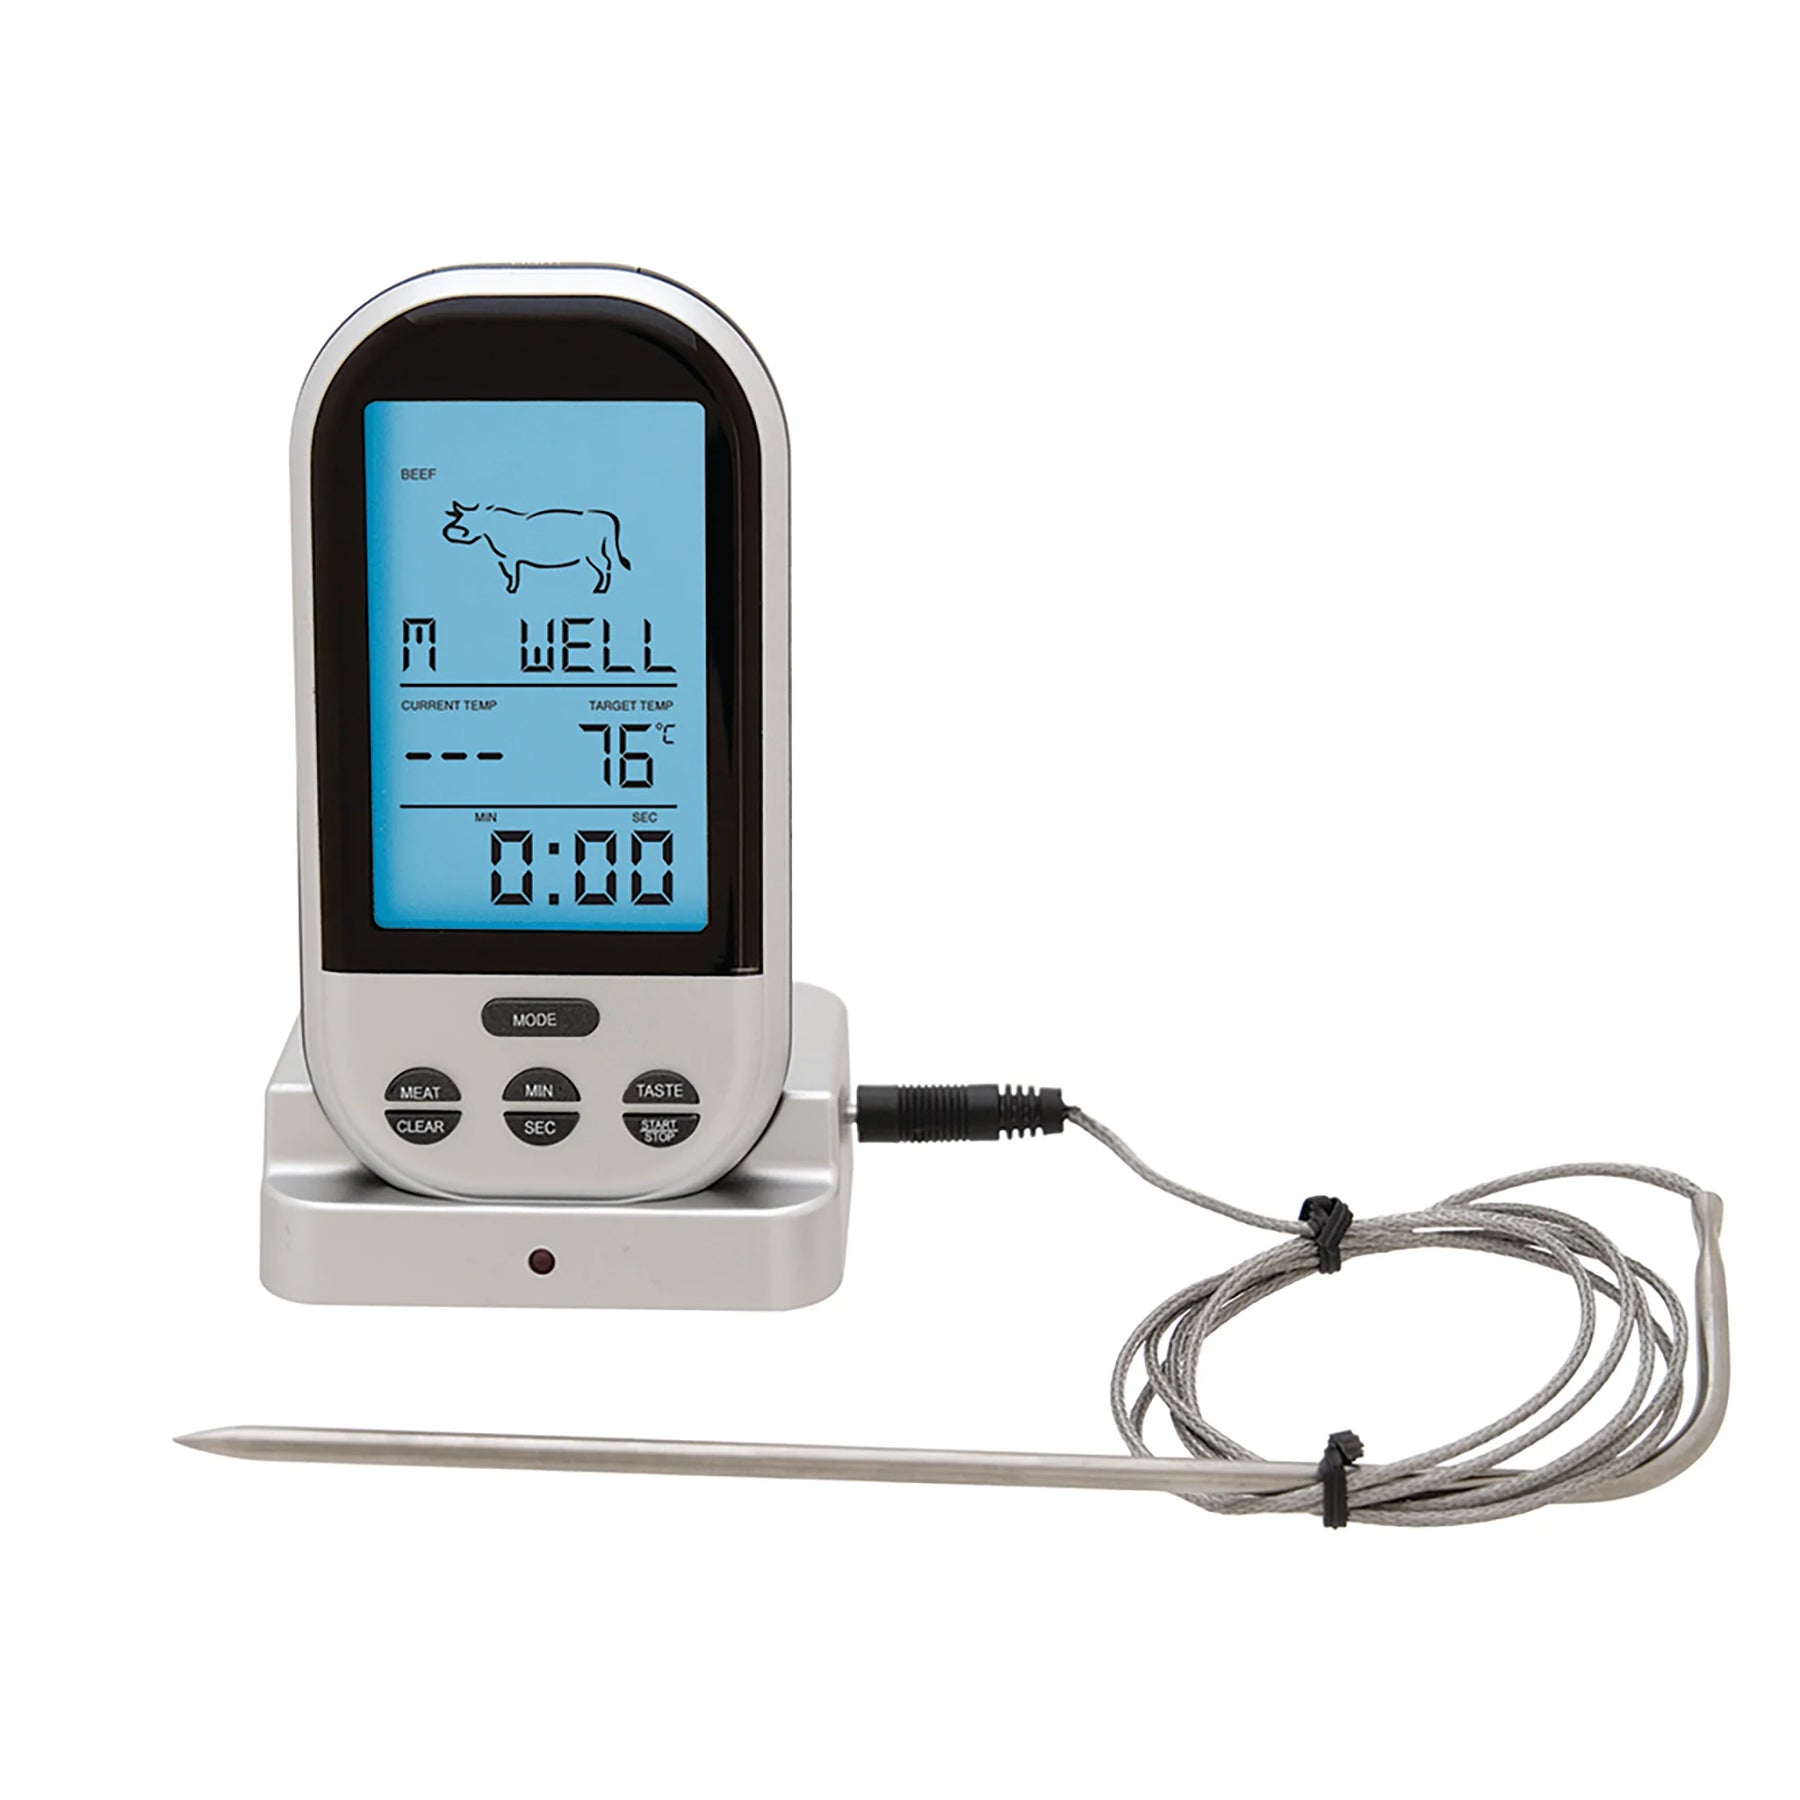 Thermor WIRELESS MEAT & POULT THERMOMETER 132HC